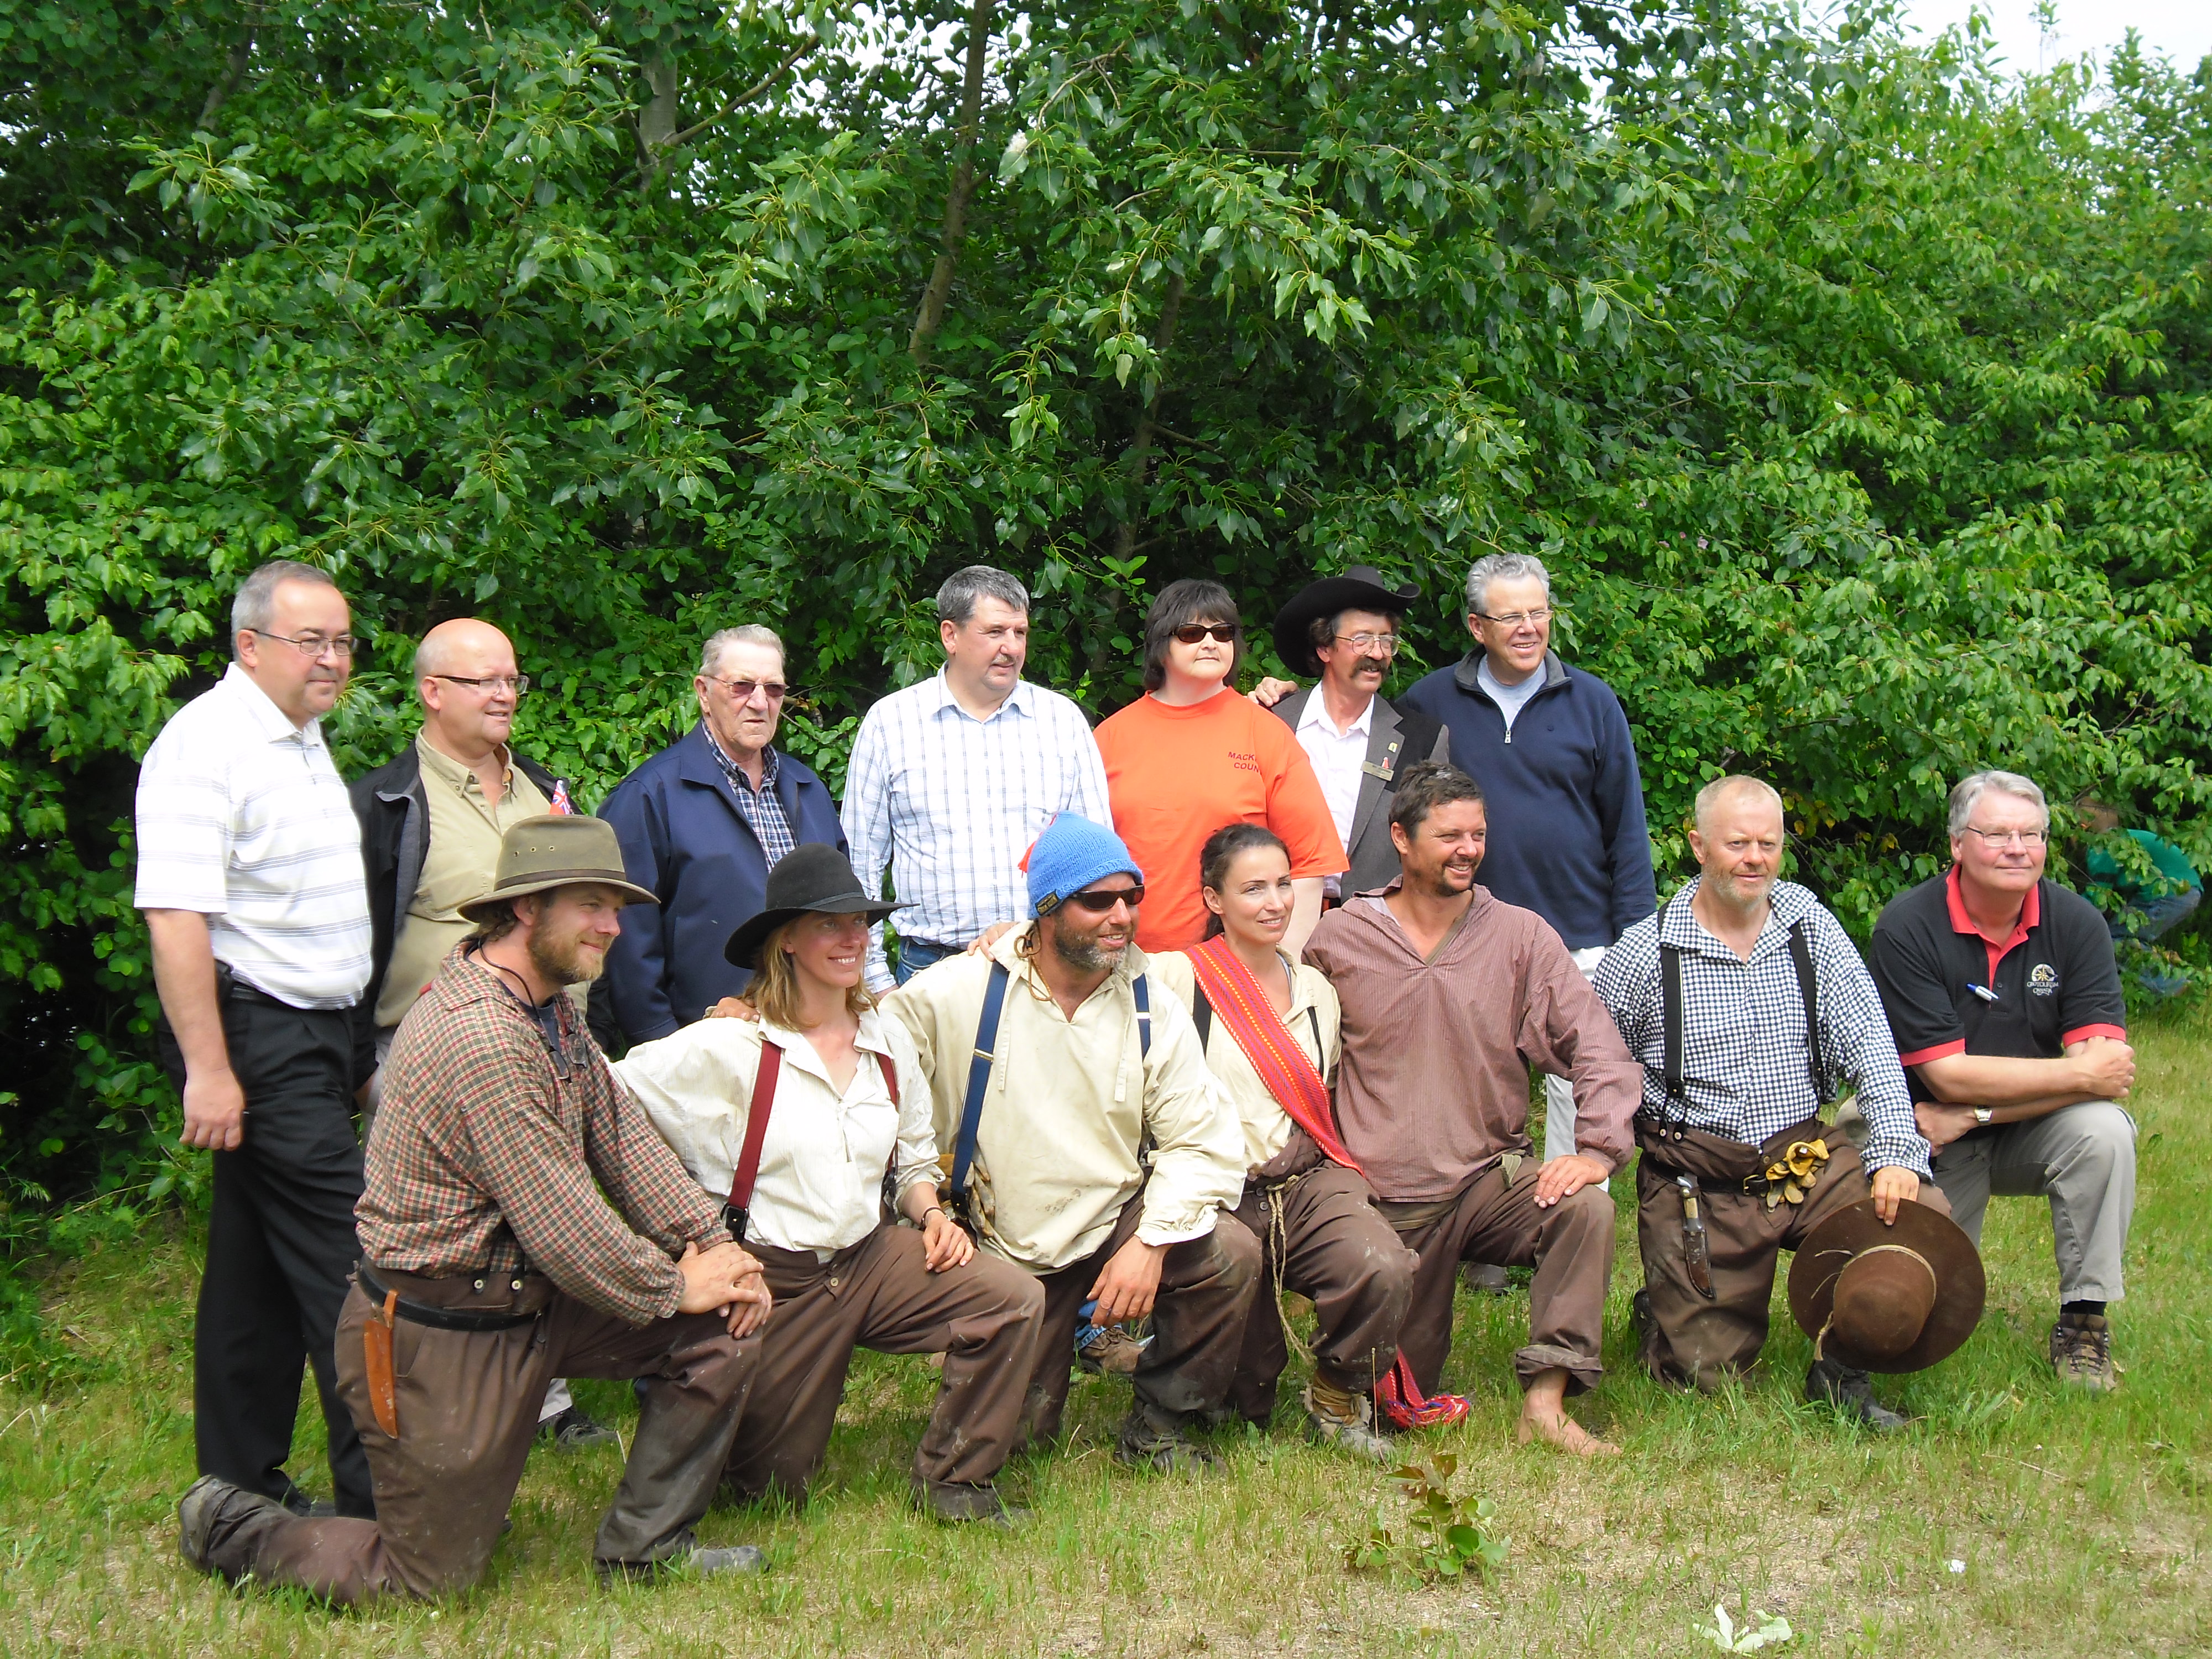 Back row: Dignitaires of the Fort Vermilion Area 
Front Row: Crew that manned the York Boat from Dunvegan to Fort Vermilion.
Photo Credit: Marilee Cranna Toews